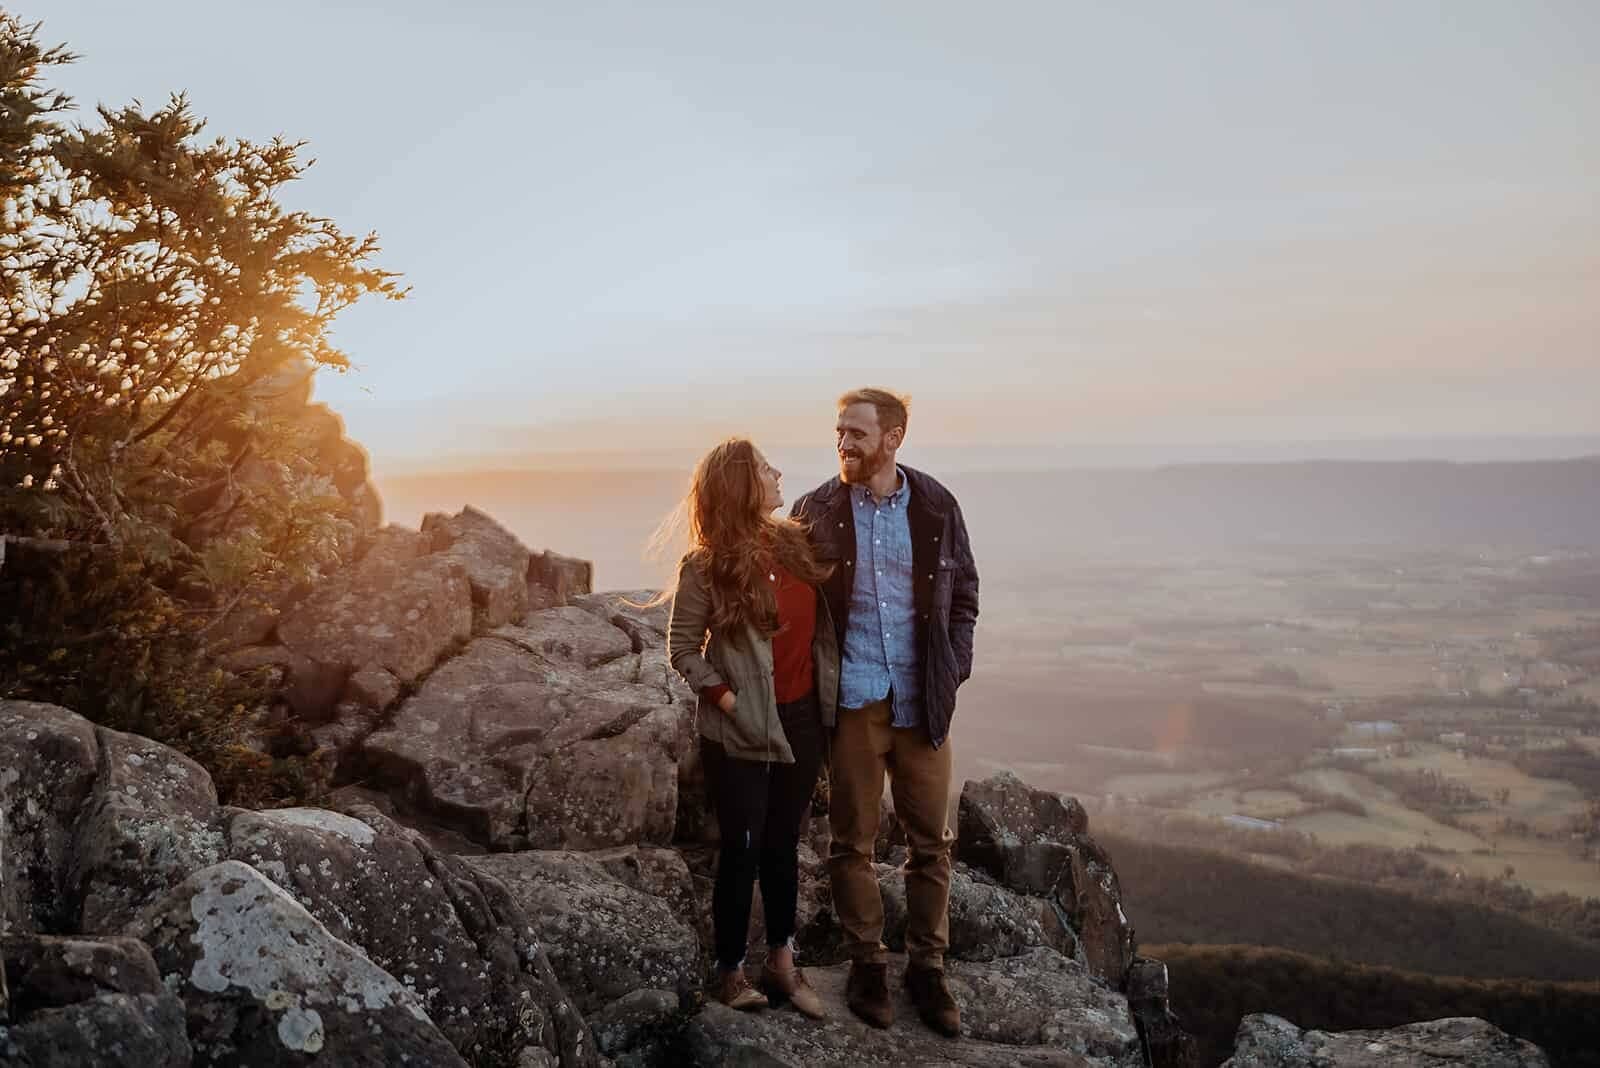 The Best Skyline Drive Overlooks for Taking Photos